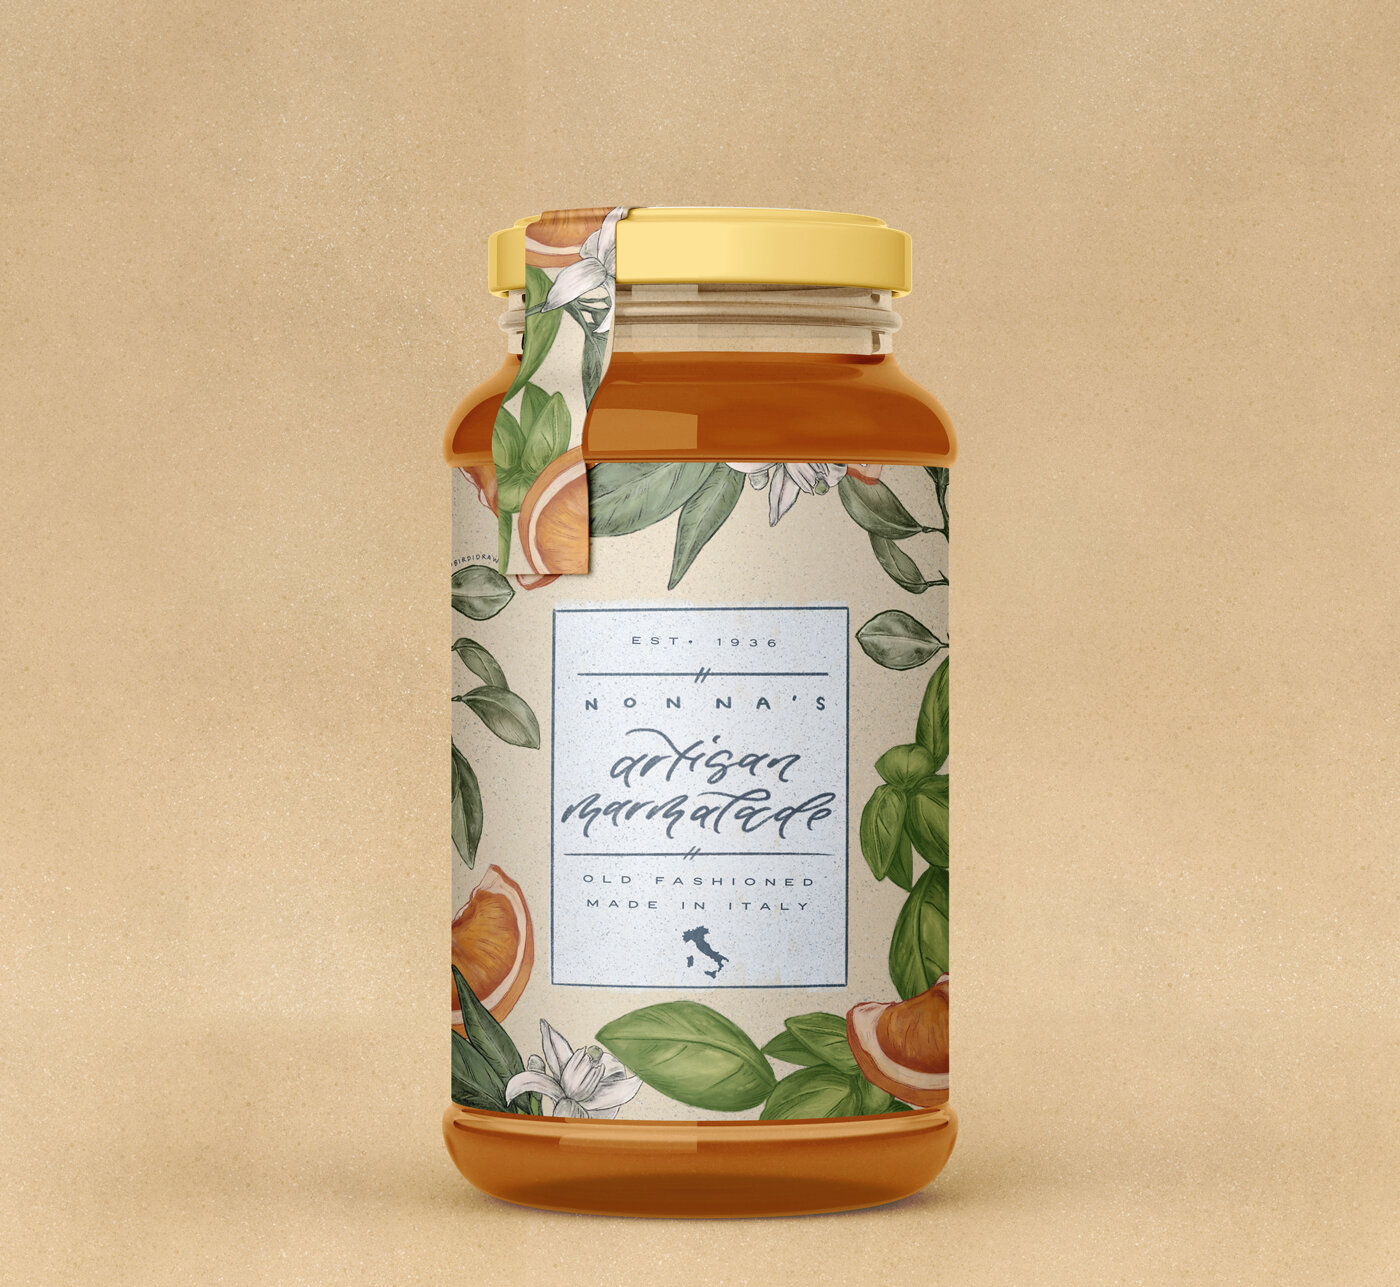  Coloured illustrations to create an artisan marmalade label. Created using Photoshop 